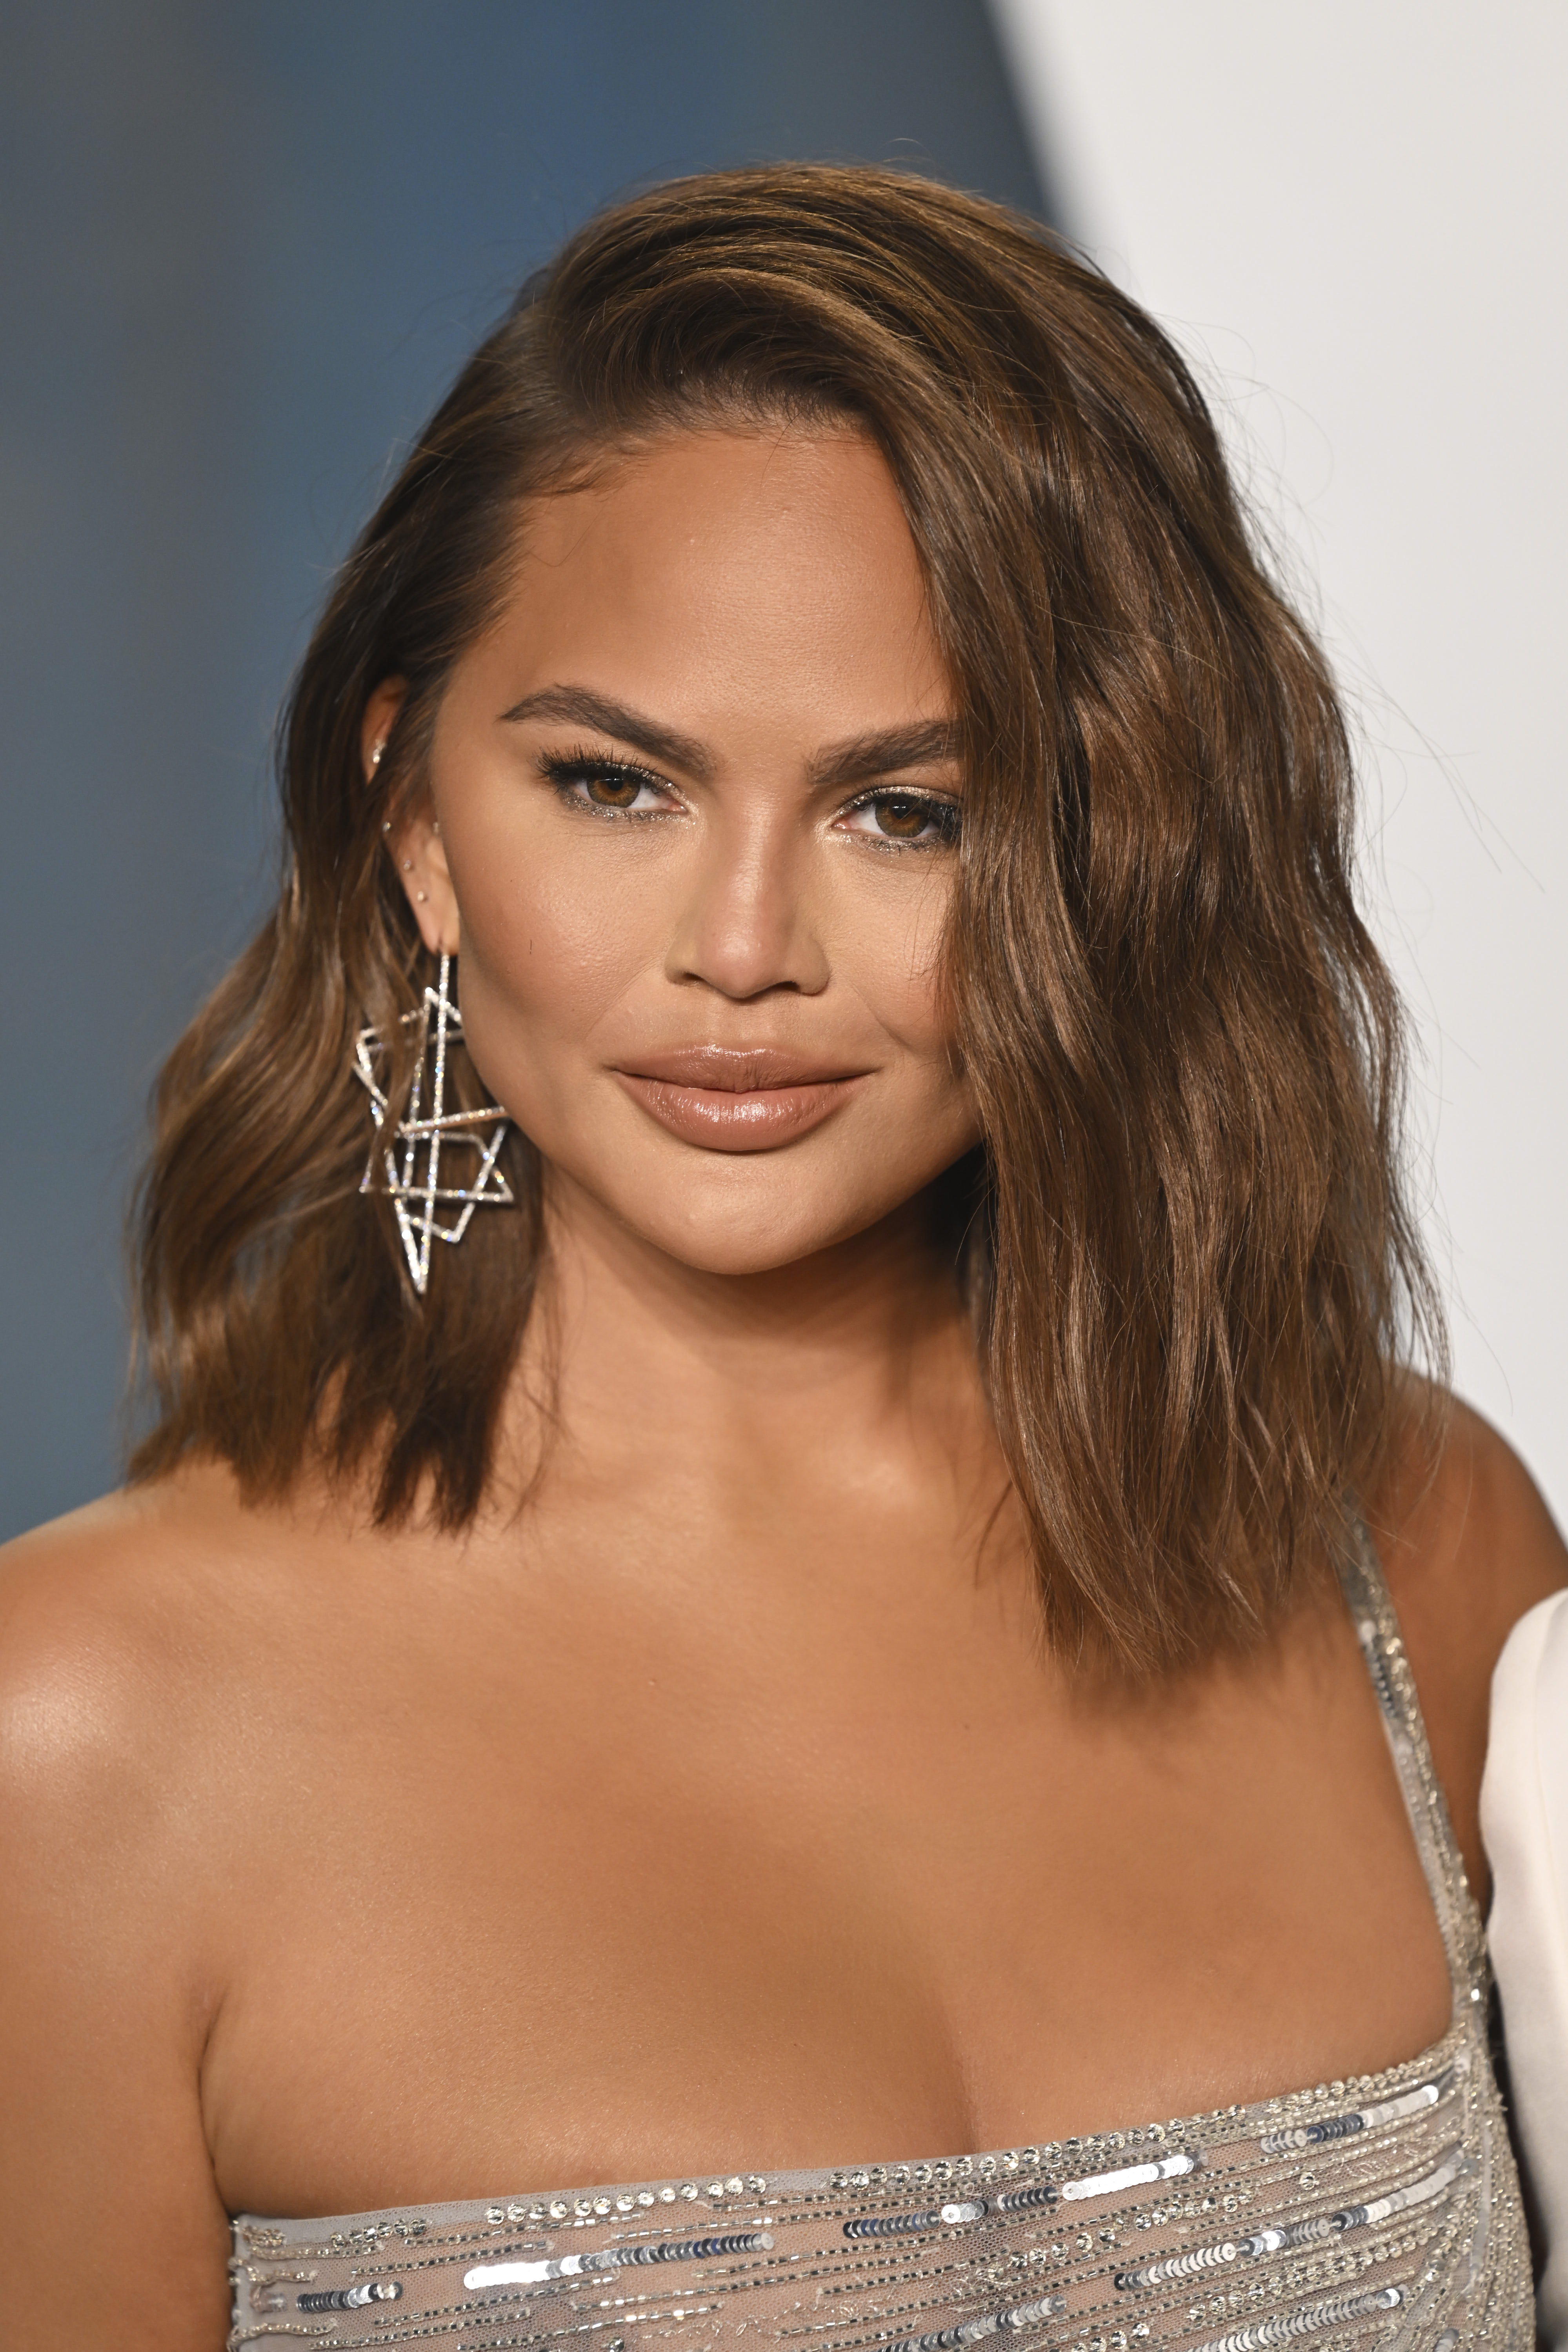 Chrissy Teigen attends the 2022 Vanity Fair Oscar Party hosted by Radhika Jones at Wallis Annenberg Center for the Performing Arts on March 27, 2022 in Beverly Hills, California